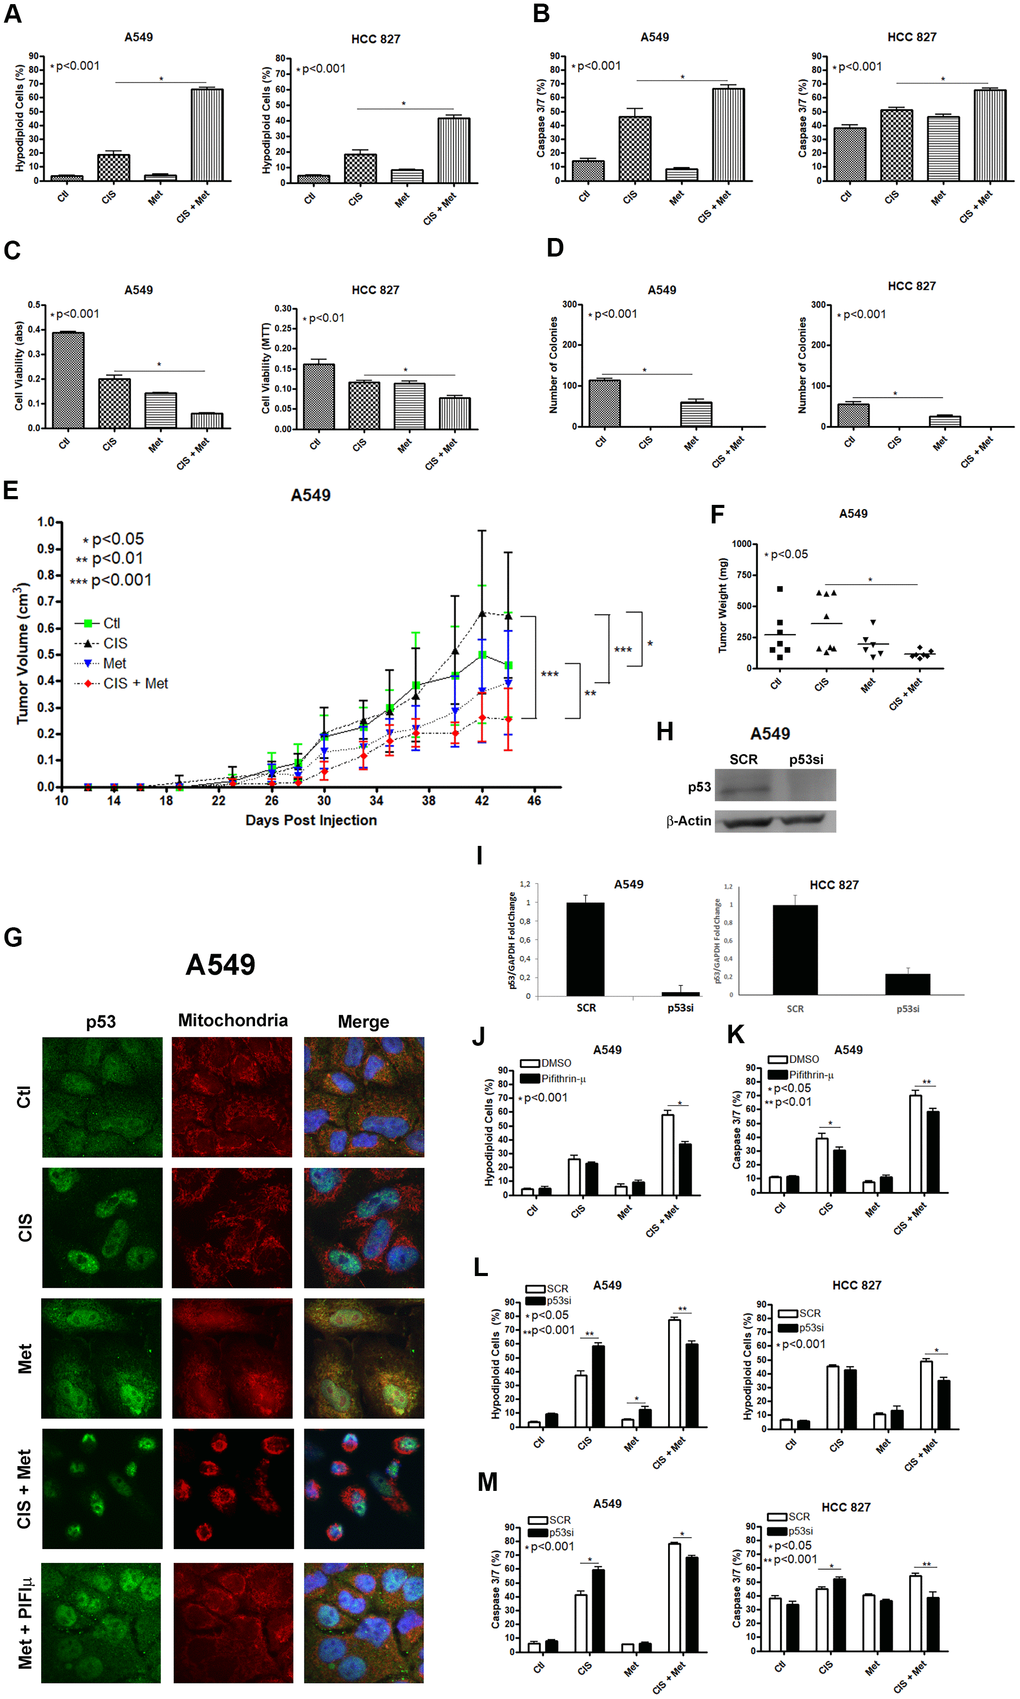 Metformin improves cisplatin-induced death in A549 and HCC 827 NSCLC cells in a P53 dependent manner. Combined treatment between cisplatin and metformin improves DNA fragmentation (pA), caspase 3 and 7 activation (pB) and cell viability assay through MTT (pC), when compared to both treatments alone in A549 and HCC 827 cells. Metformin decreased the number of colonies and no colonies was observed after cisplatin treatment in A549 and HCC 827 cells (pD). A549 cells injected in NOD/SCID mice also have a smaller volume (pE) and weight (pF) after combined treatment between cisplatin and metformin. Data represent the mean of three independent experiments. Metformin treatment translocate P53 to the mitochondria in A549 cells and this translocation is blocked by pifithrin-μ (G). P53 inhibition by pifithrin-μ protects A549 cells to the metformin induced chemosensitization to cisplatin by decreasing DNA fragmentation (pJ) and caspase 3 and 7 activation (pK). TP53 inhibition by siRNA (H, I) also protects A549 and HCC 827 cell from metformin-induced chemosensitization to cisplatin by decreasing DNA fragmentation (pL) and caspase 3 and 7 activation (pM). Data represent the mean of three independent experiments. A549 cells were treated with 10mM of metformin for 72 h and 25μM of cisplatin (with or without metformin) for another 72 h. HCC 827 cells were treated with 20mM of metformin for 72 h and 20μM of cisplatin (with or without metformin) for another 72 h.